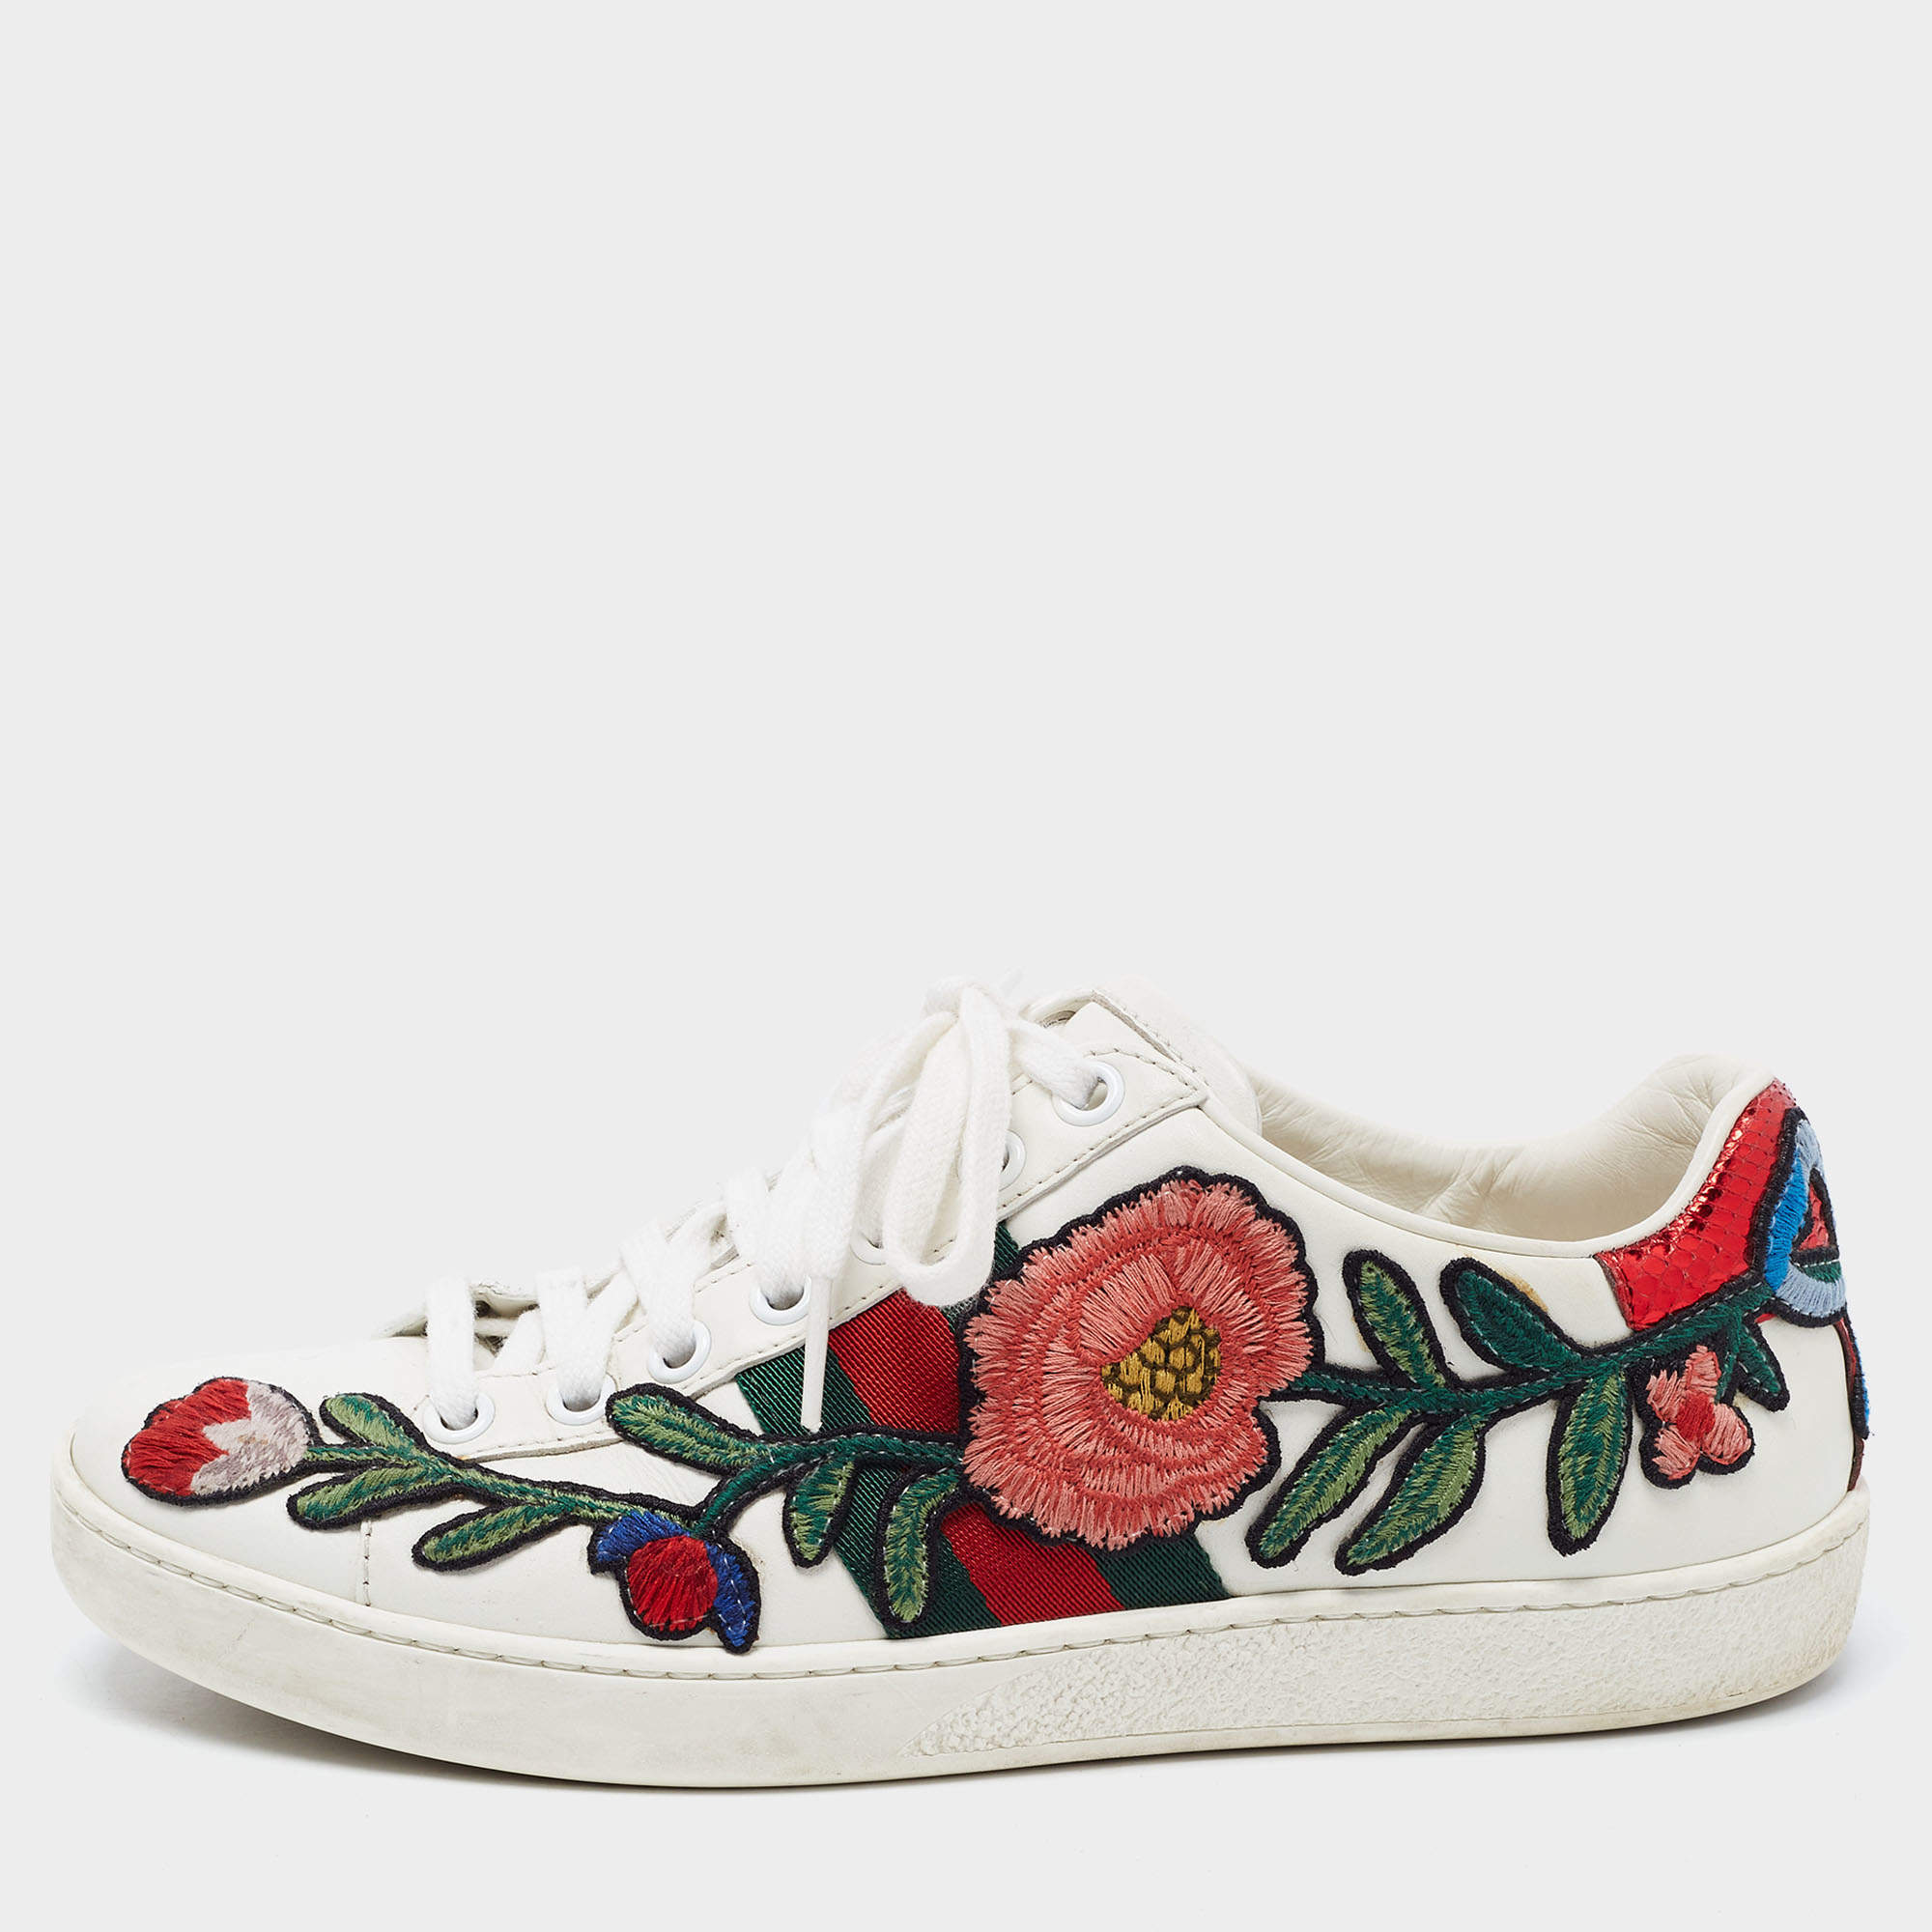 pickup] Gucci Ace embroidery  Gucci ace sneakers, Sneaker outfits women, Gucci  outfits